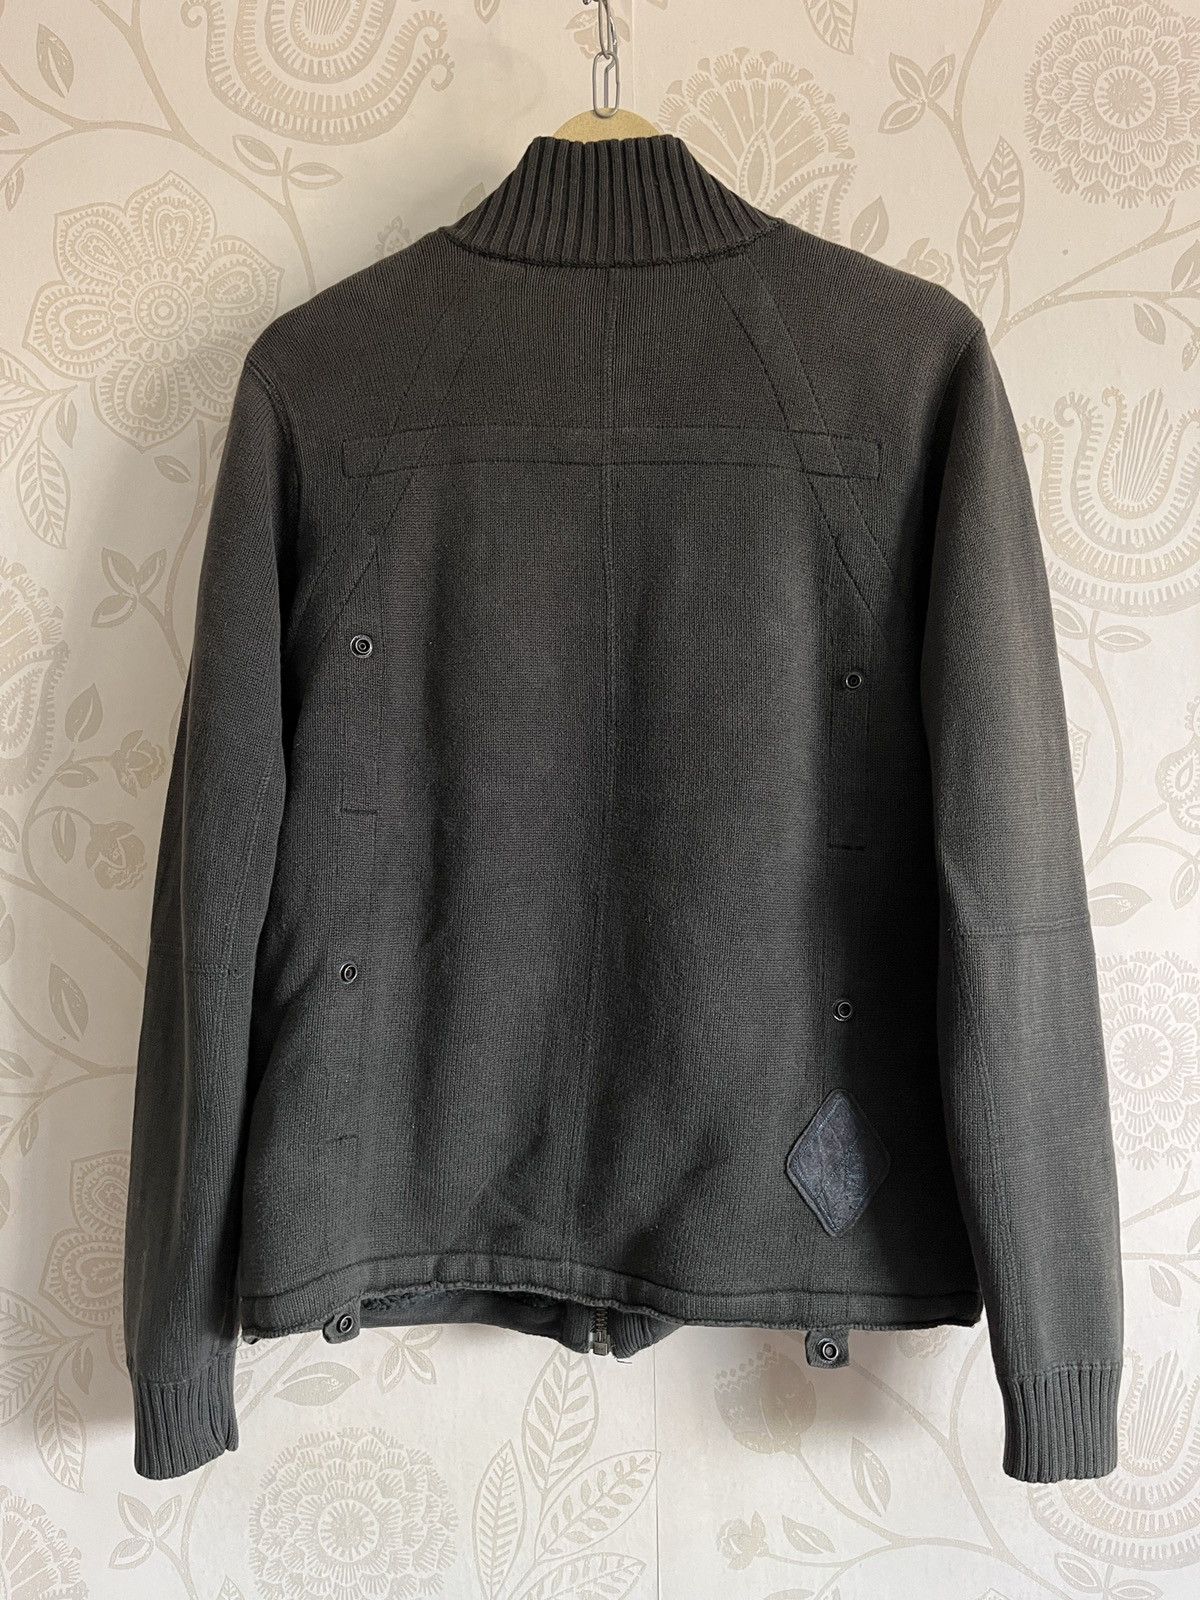 Vintage - Army Sweater G Star Raw Knitwear Wool Tactical Jacket - 17